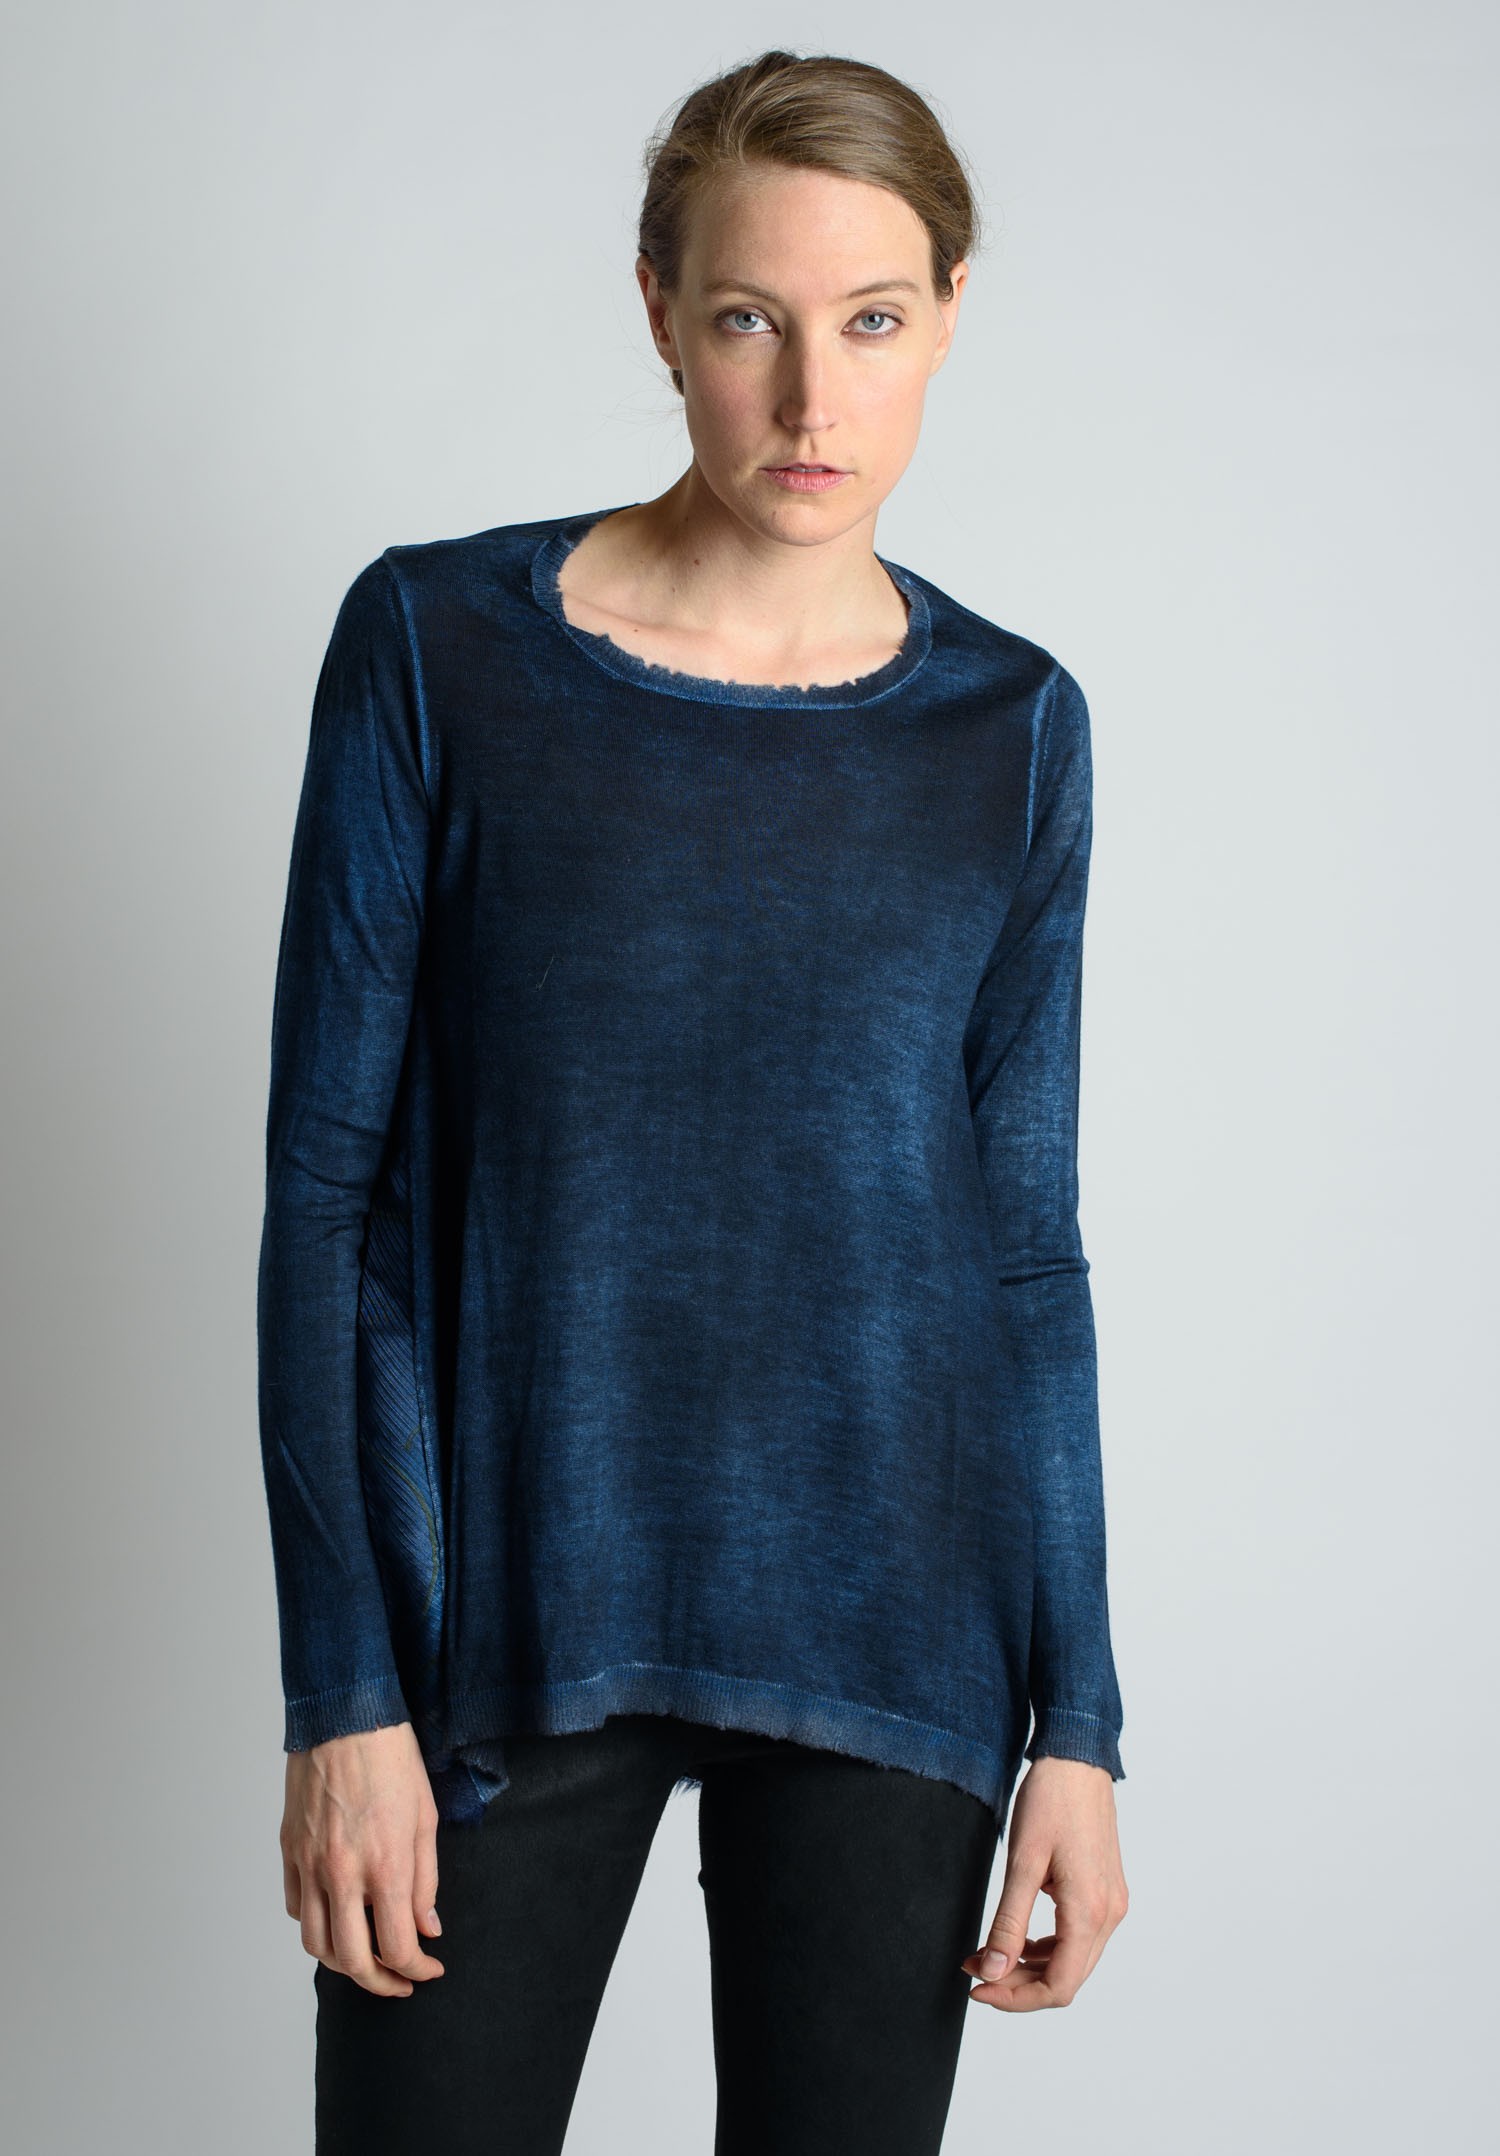 Avant Toi Light Cashmere Sweater with Graphic Silk Back in Blue Ink ...